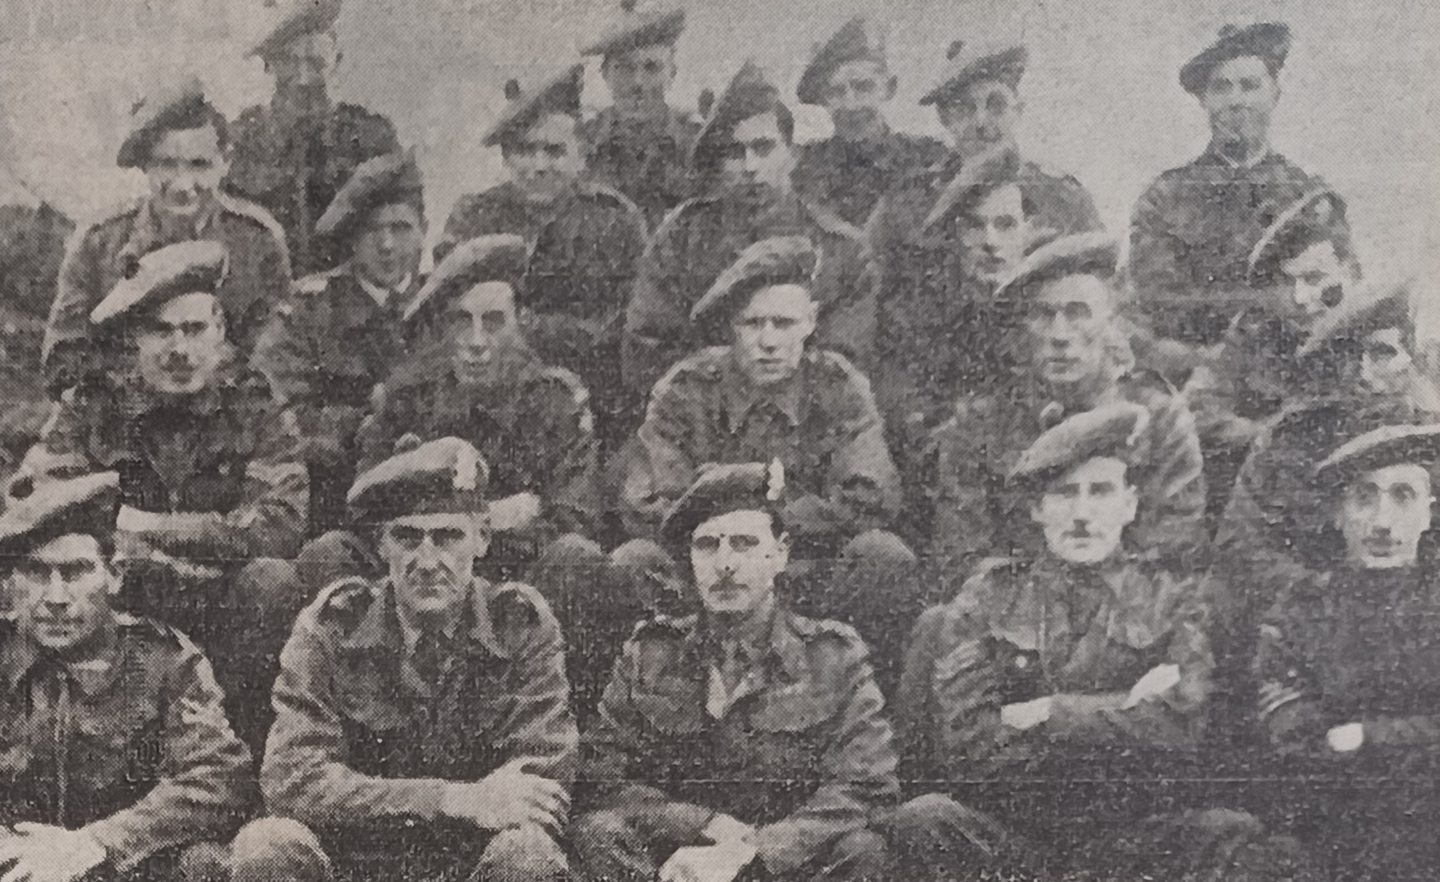 The Arbroath-Carnoustie Auxiliary Unit during the war.